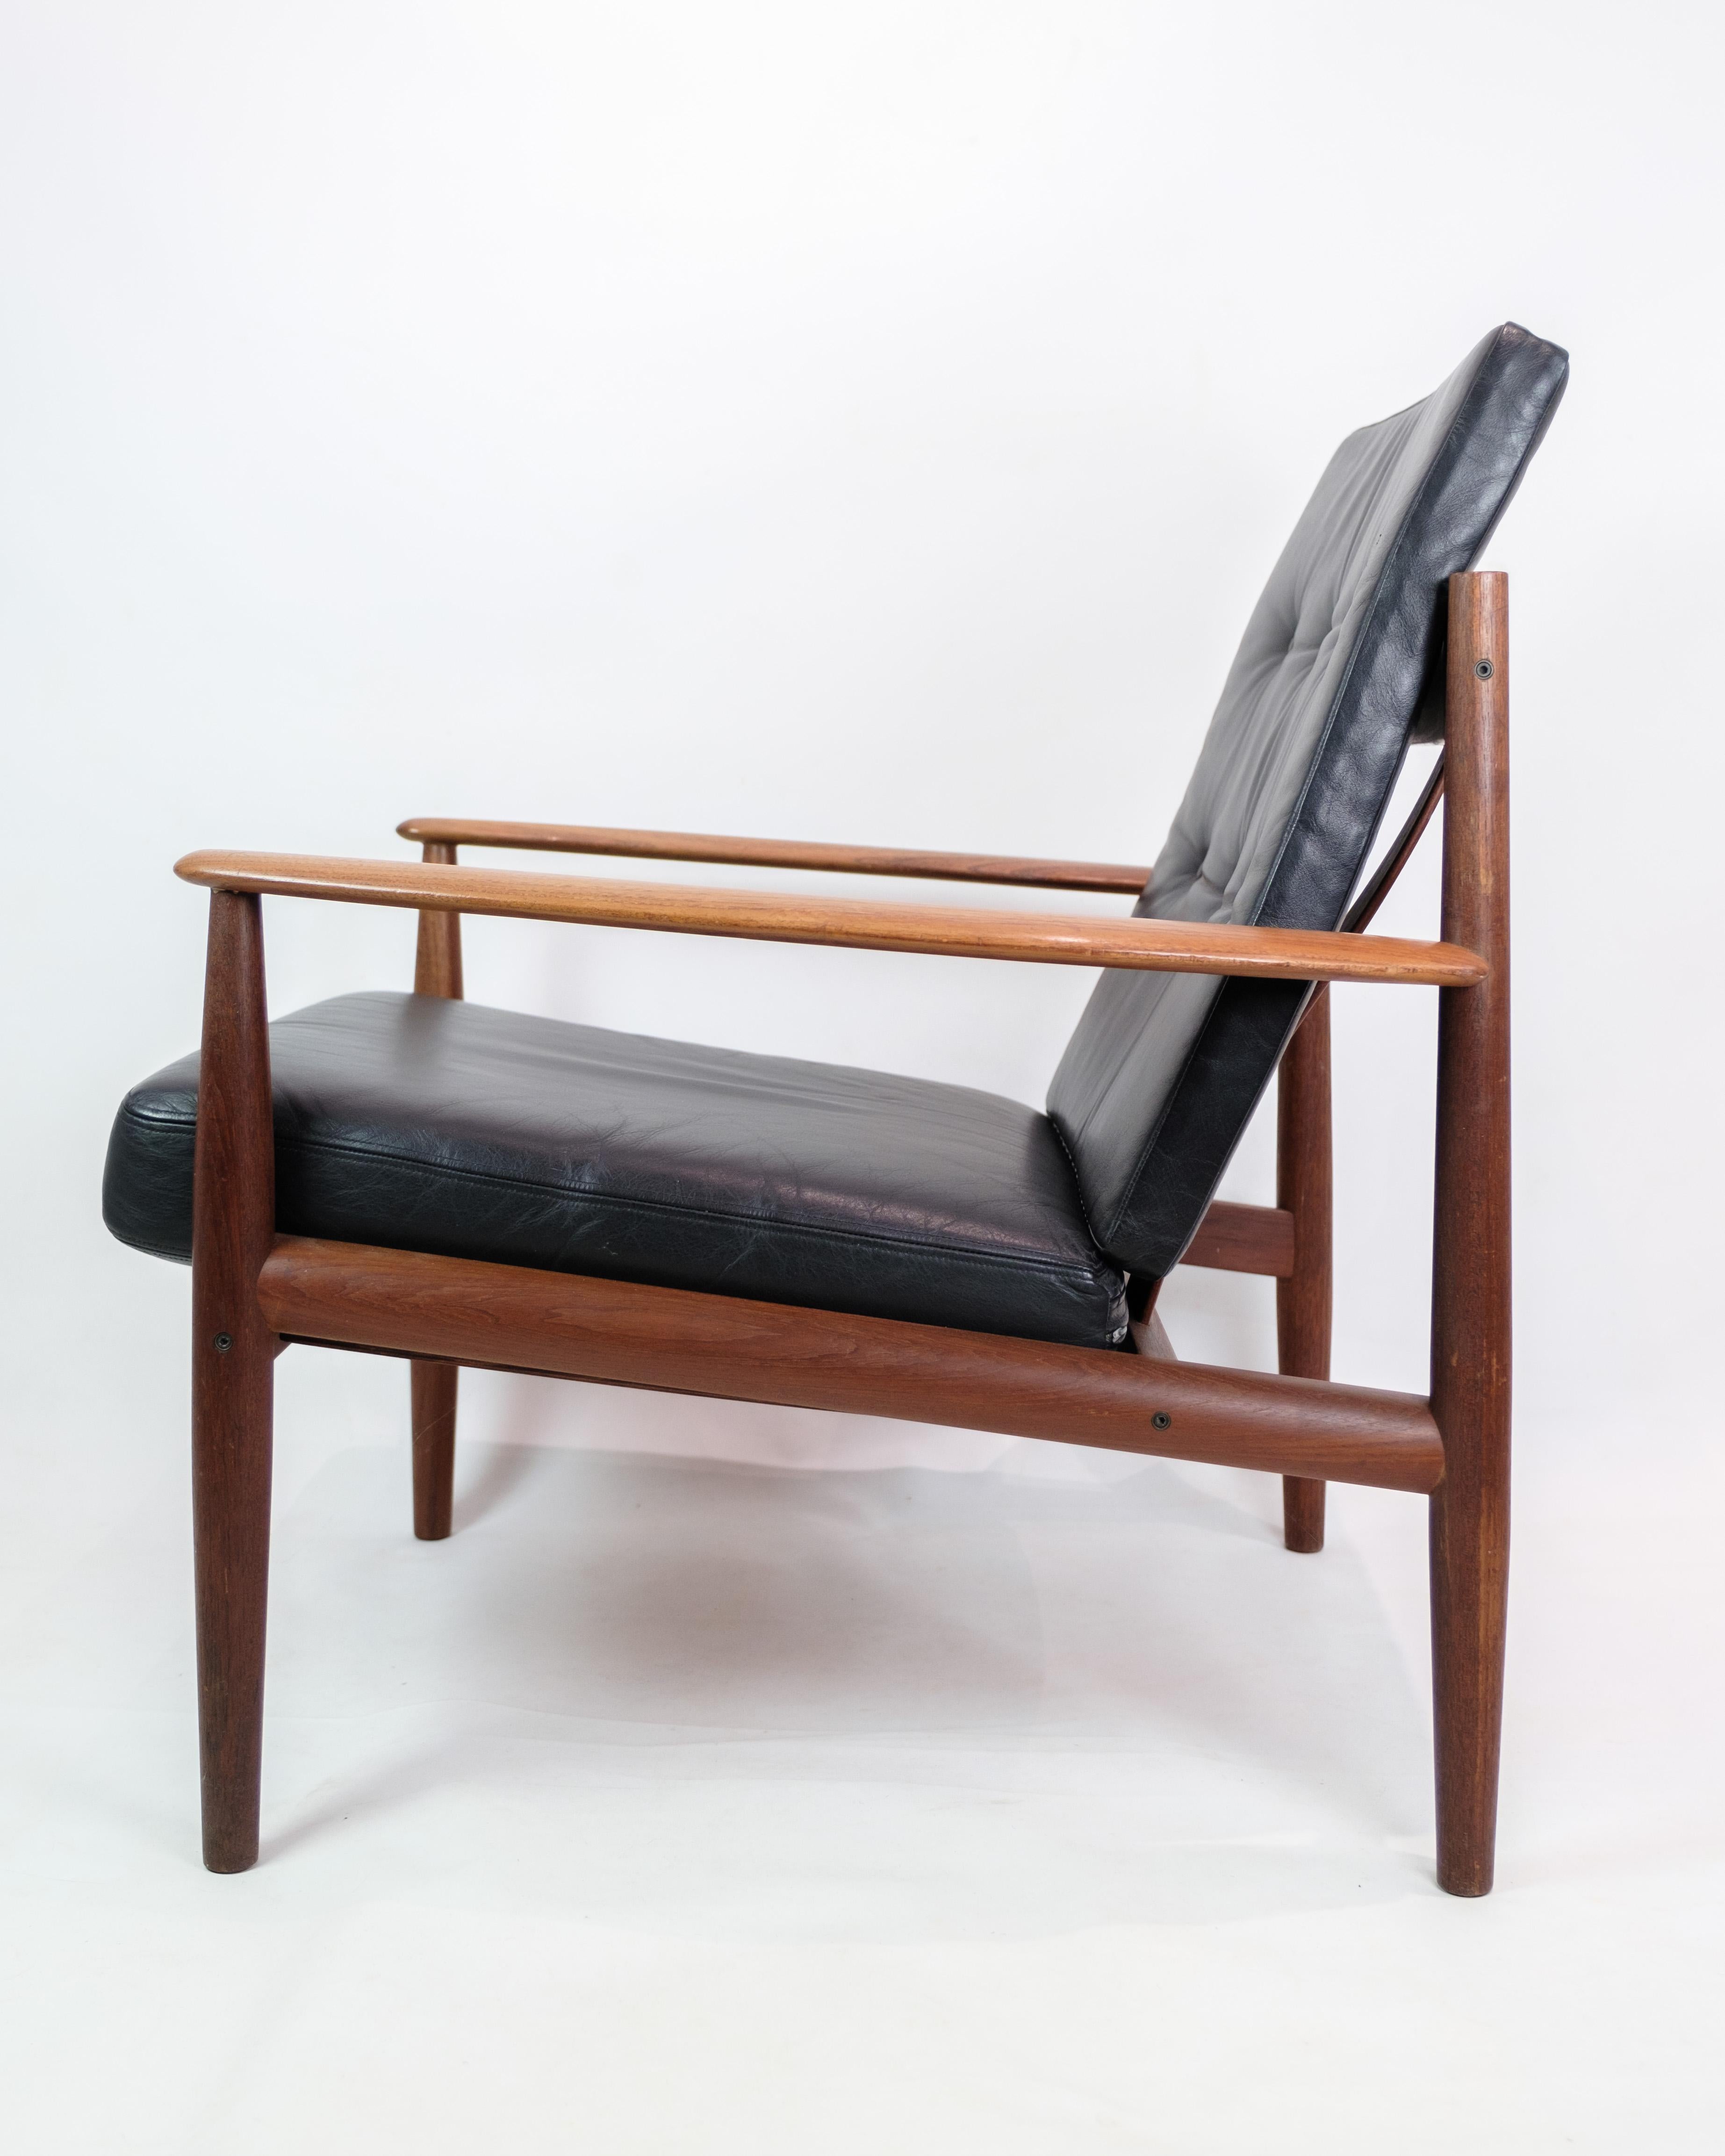 Enjoy a sophisticated resting experience with this recliner, model 118, designed by the talented Grete Jalk and manufactured by France & Son in the 1960s. Crafted in teak and elegant black leather, this chair is a true gem of mid-century modernist